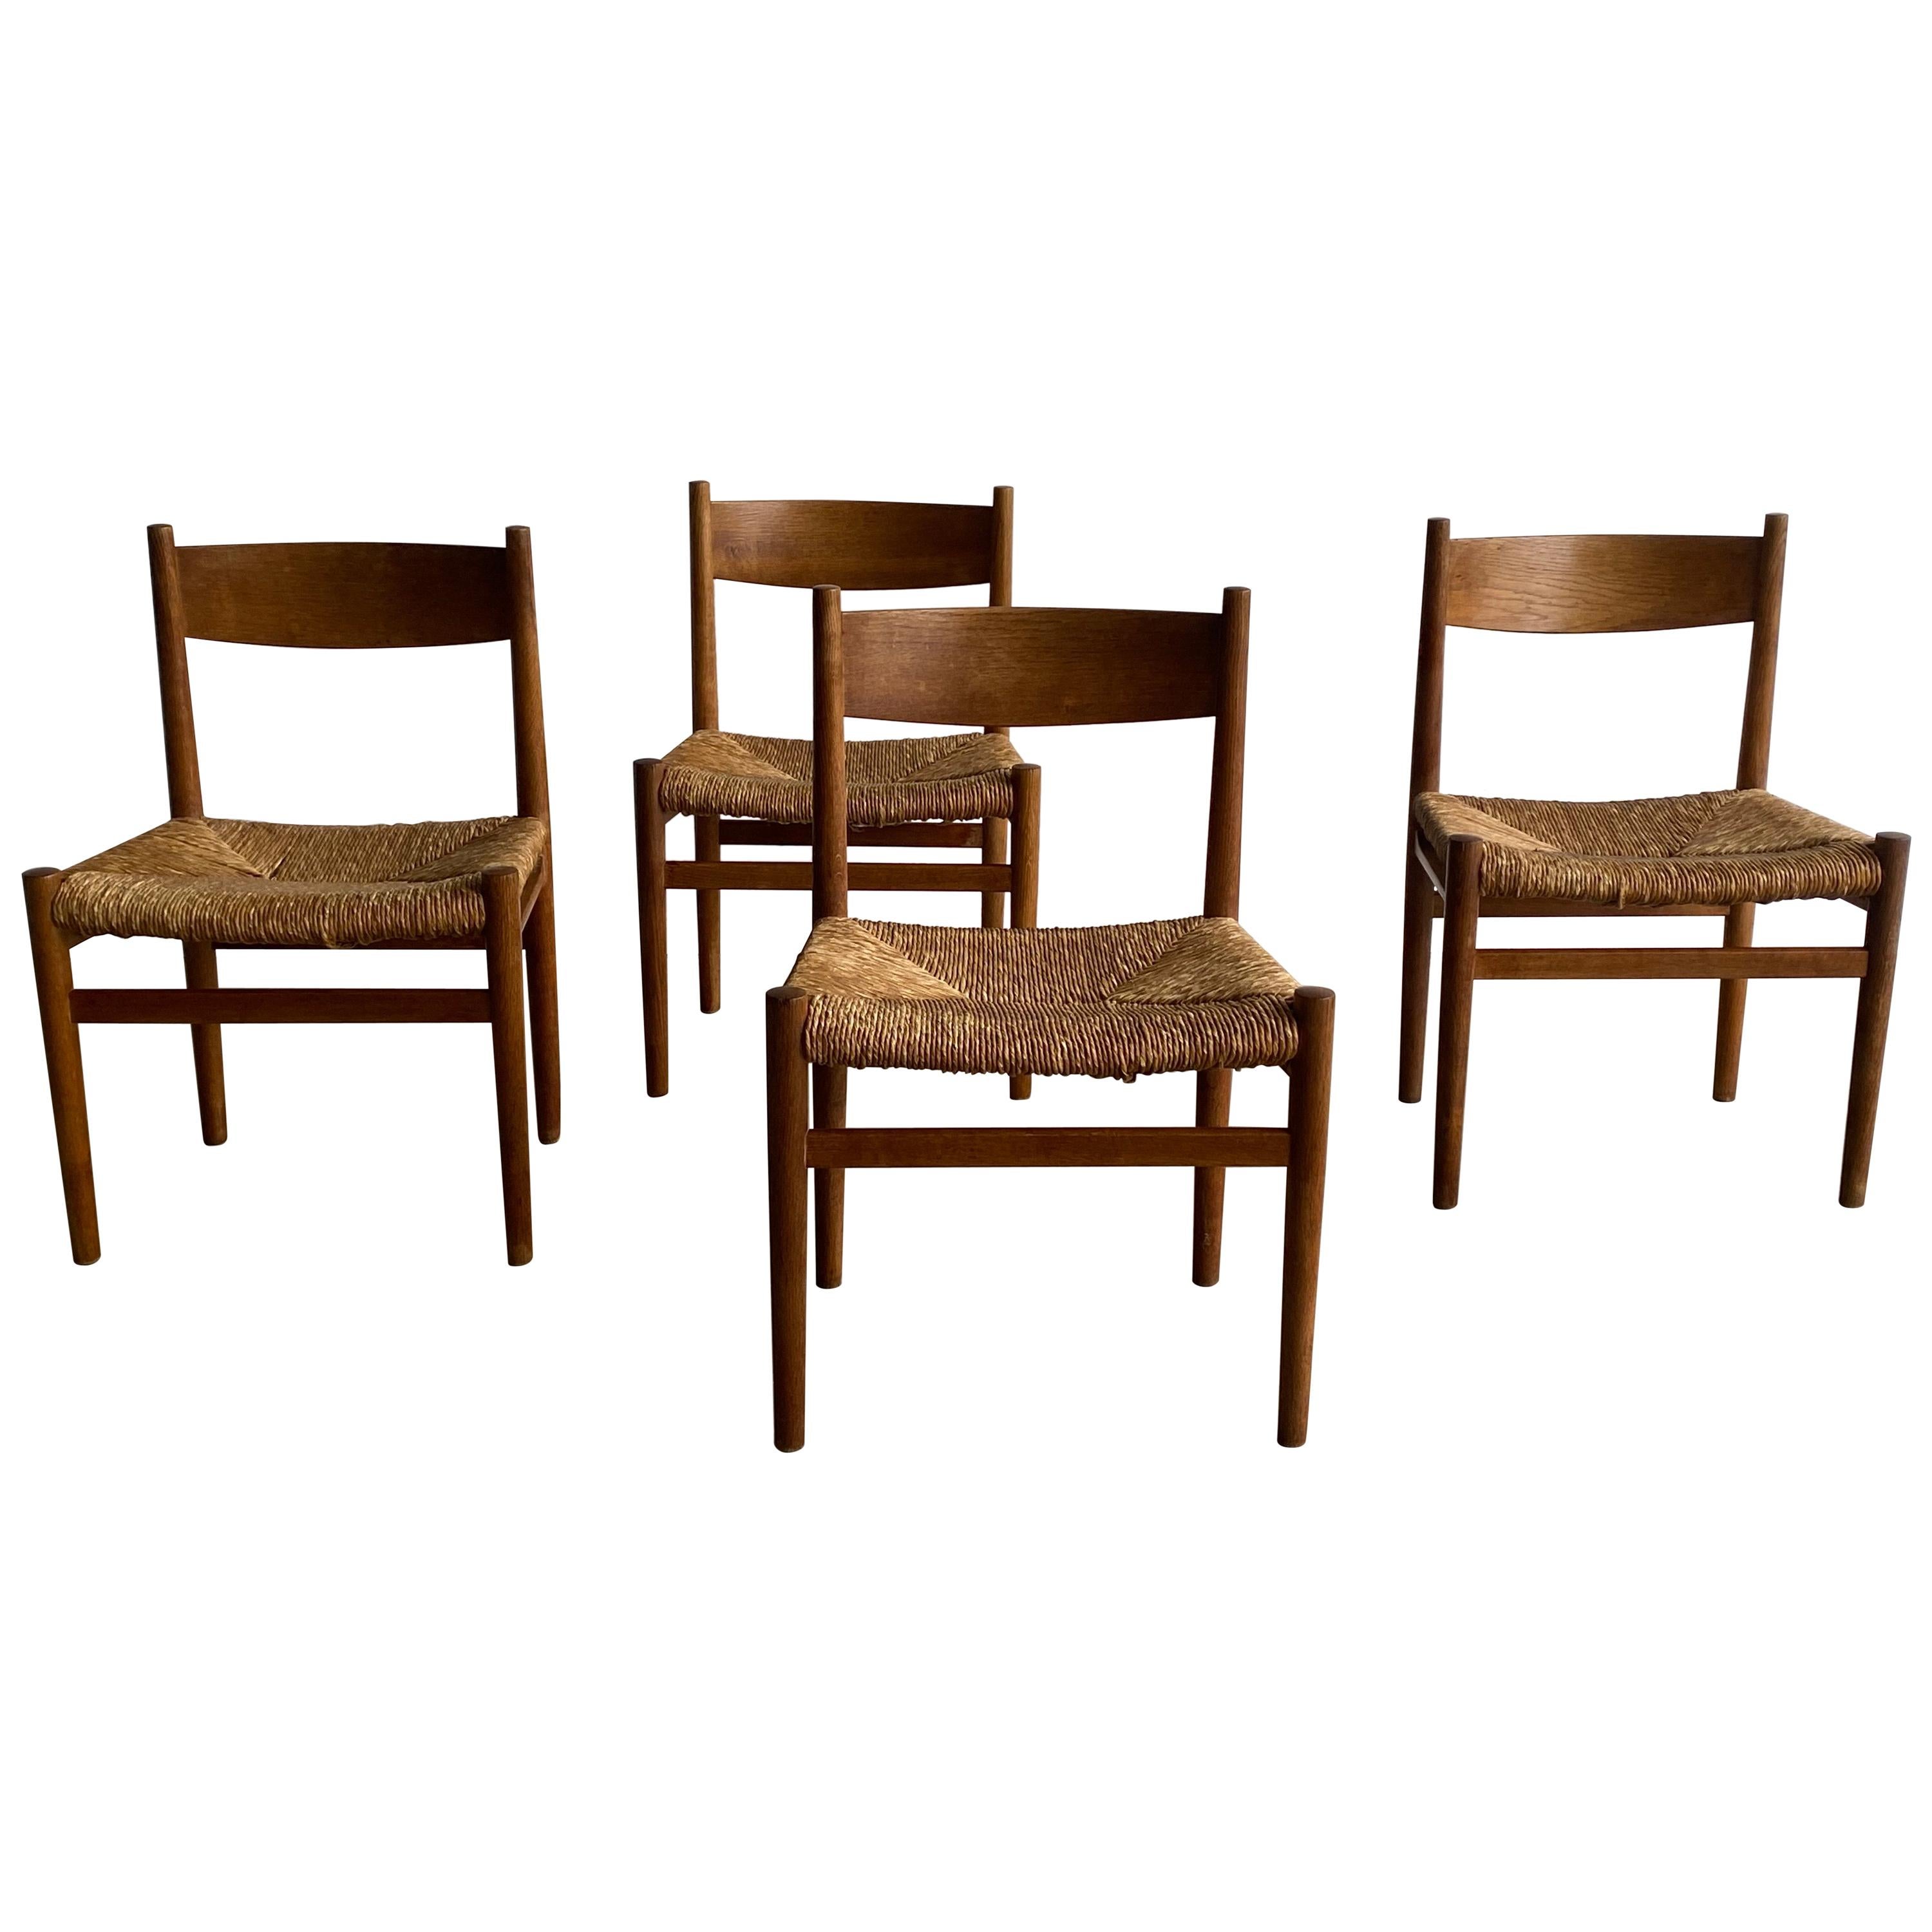 Set of 4 Woven Rush Danish Design Dining Room Chairs in Oak